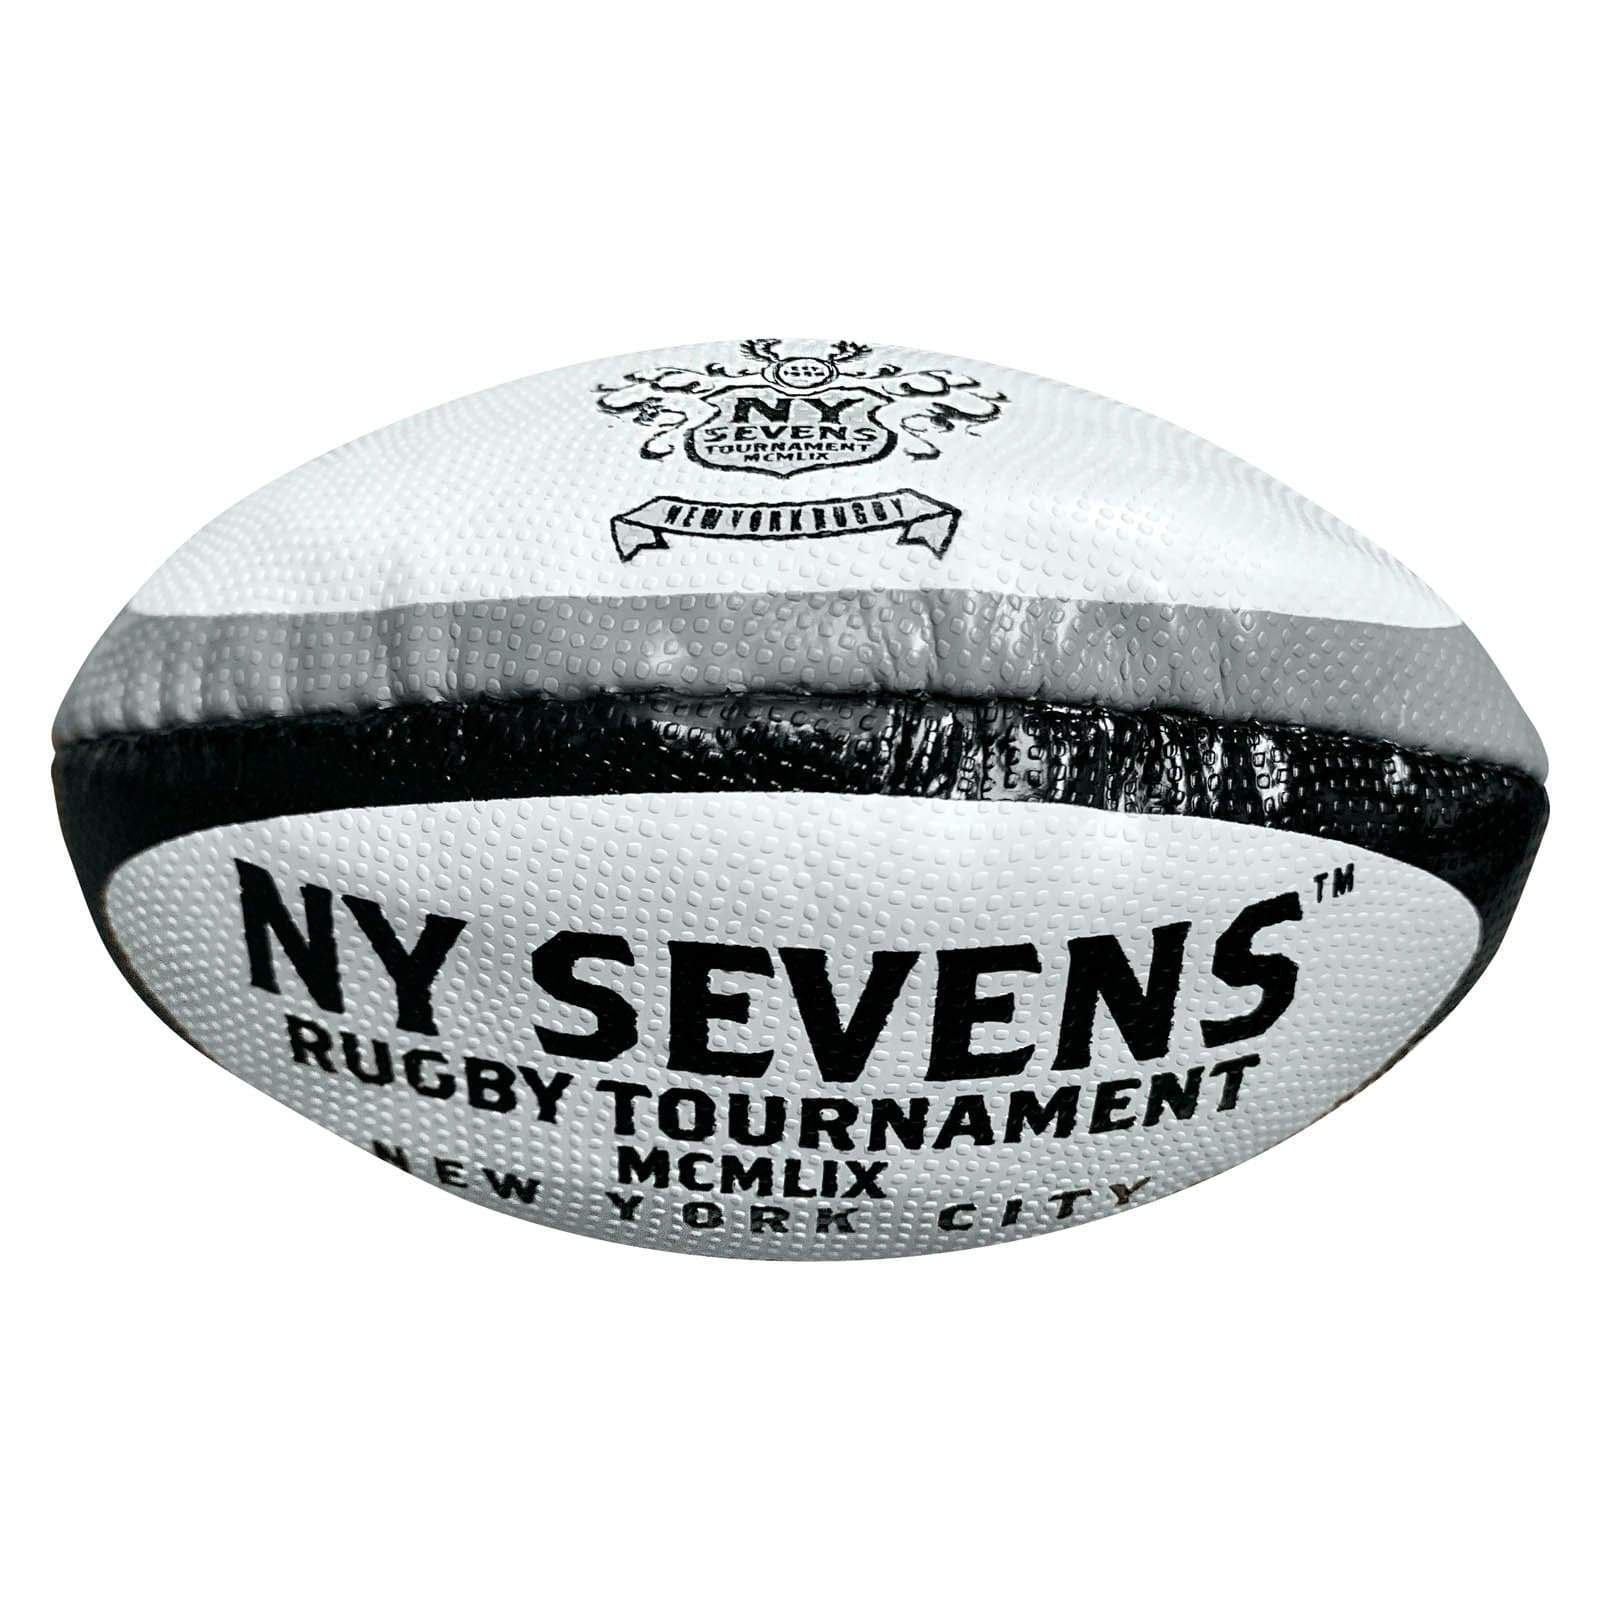 Rugby Imports New York Sevens Mini Rugby Ball